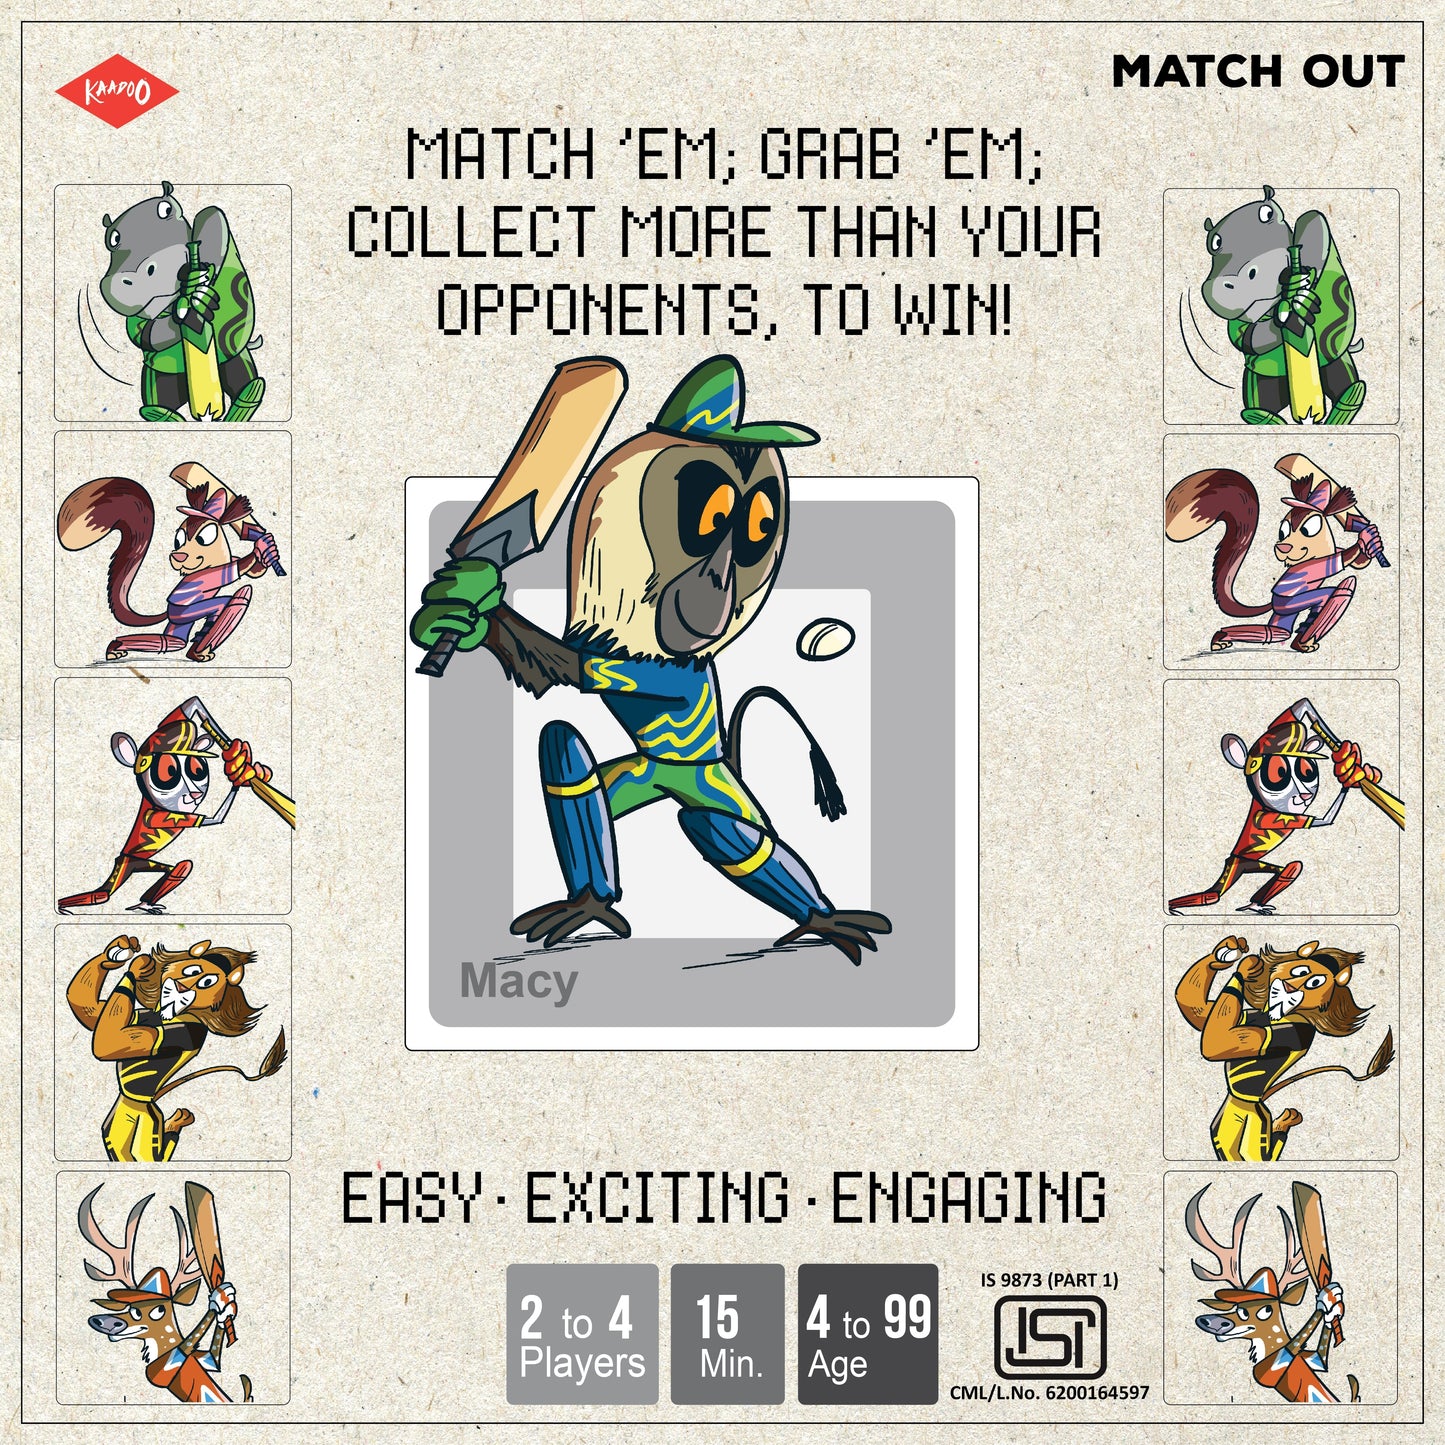 MATCH OUT Card Game - Grab Your JUNGLY CRICKETERS, Fast! (Pack of 10)